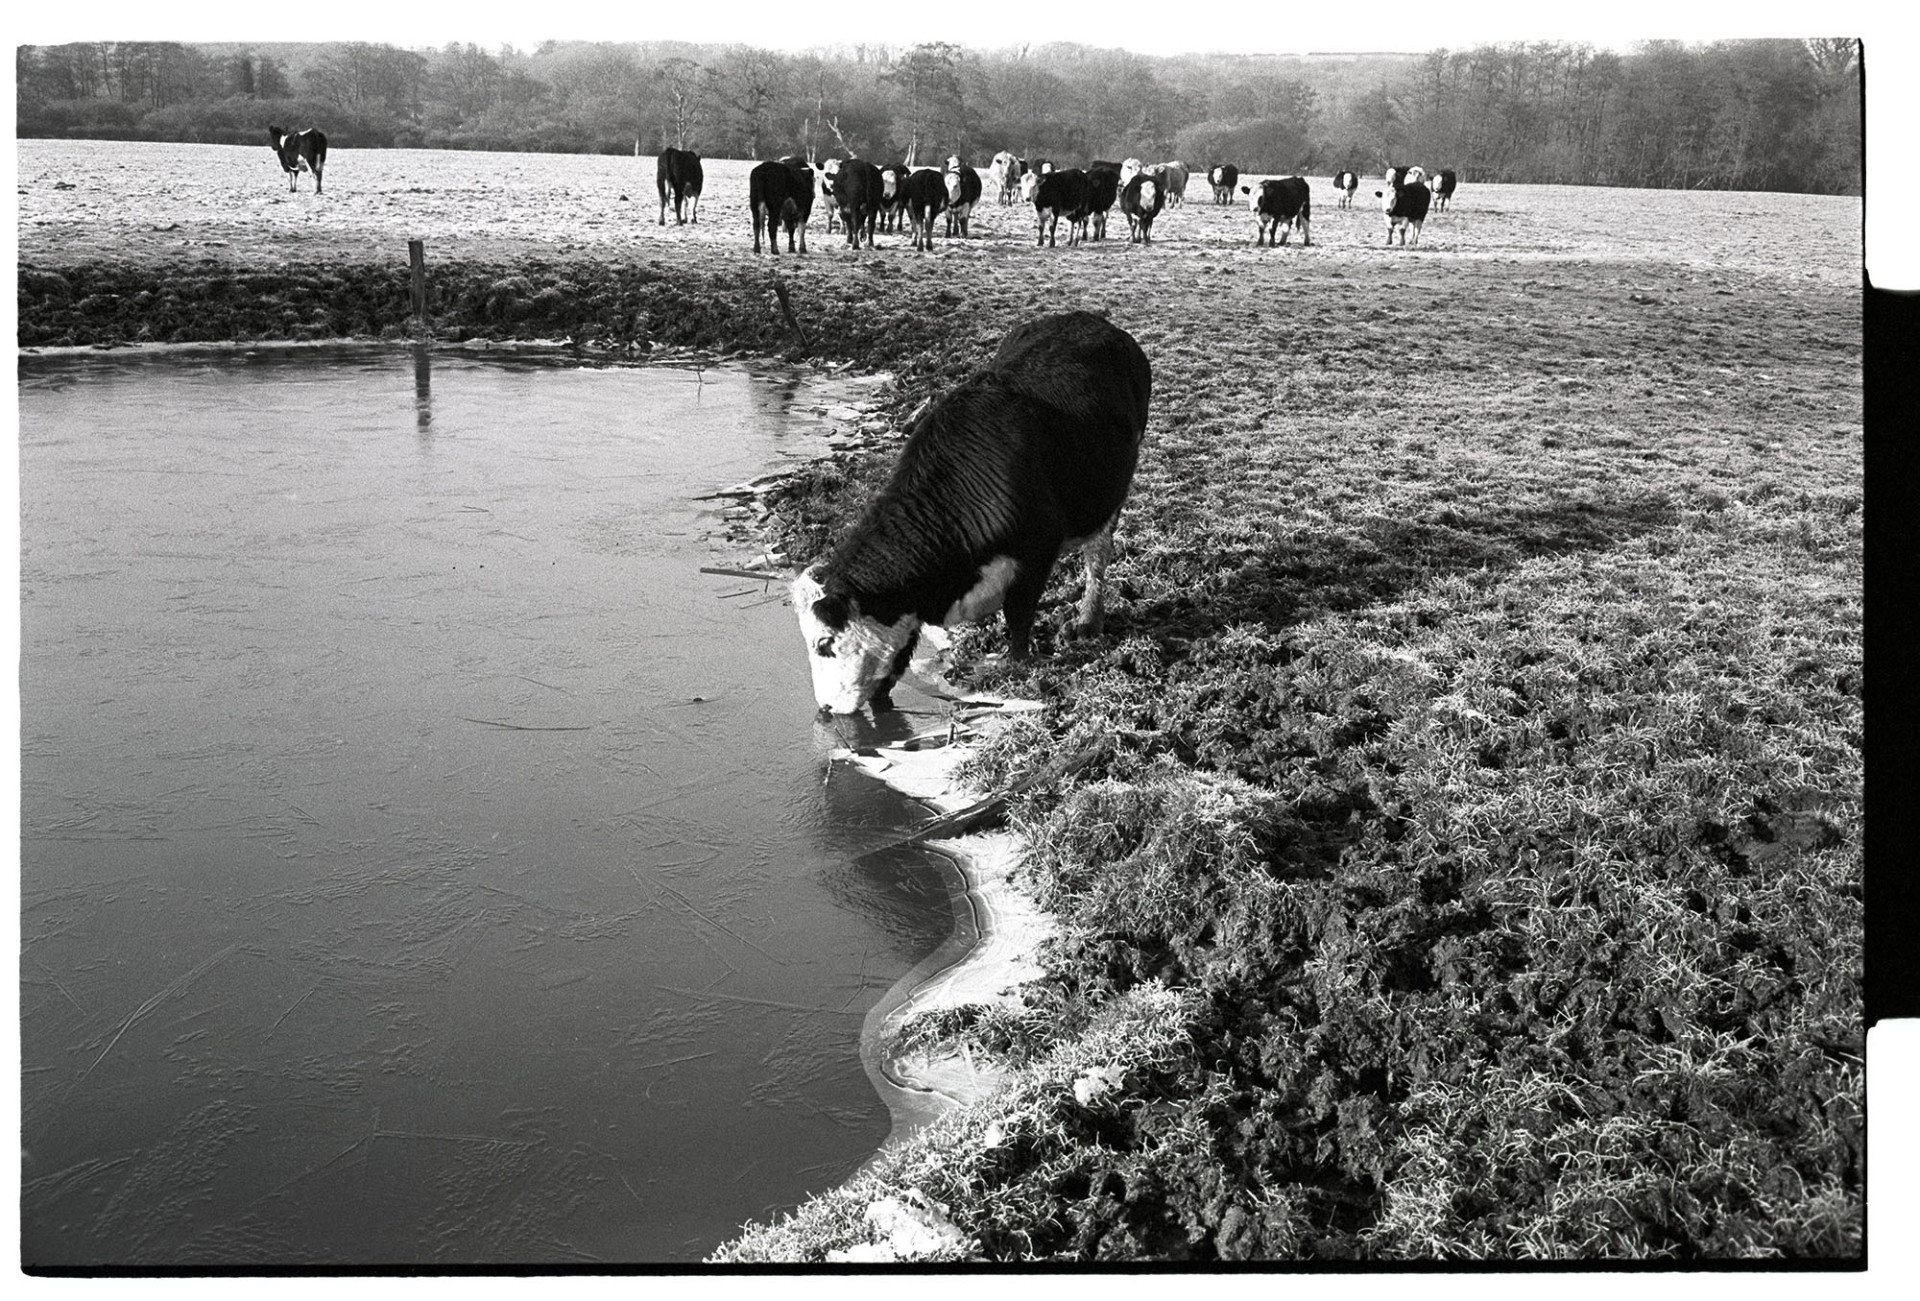 Cow, Bullock drinking from frozen pond, ice. 
[A bullock drinking from a pond which has frozen over in a field at Bridgetown, Iddesleigh. Frost is visible on the grass, and trees can be seen in the background.]